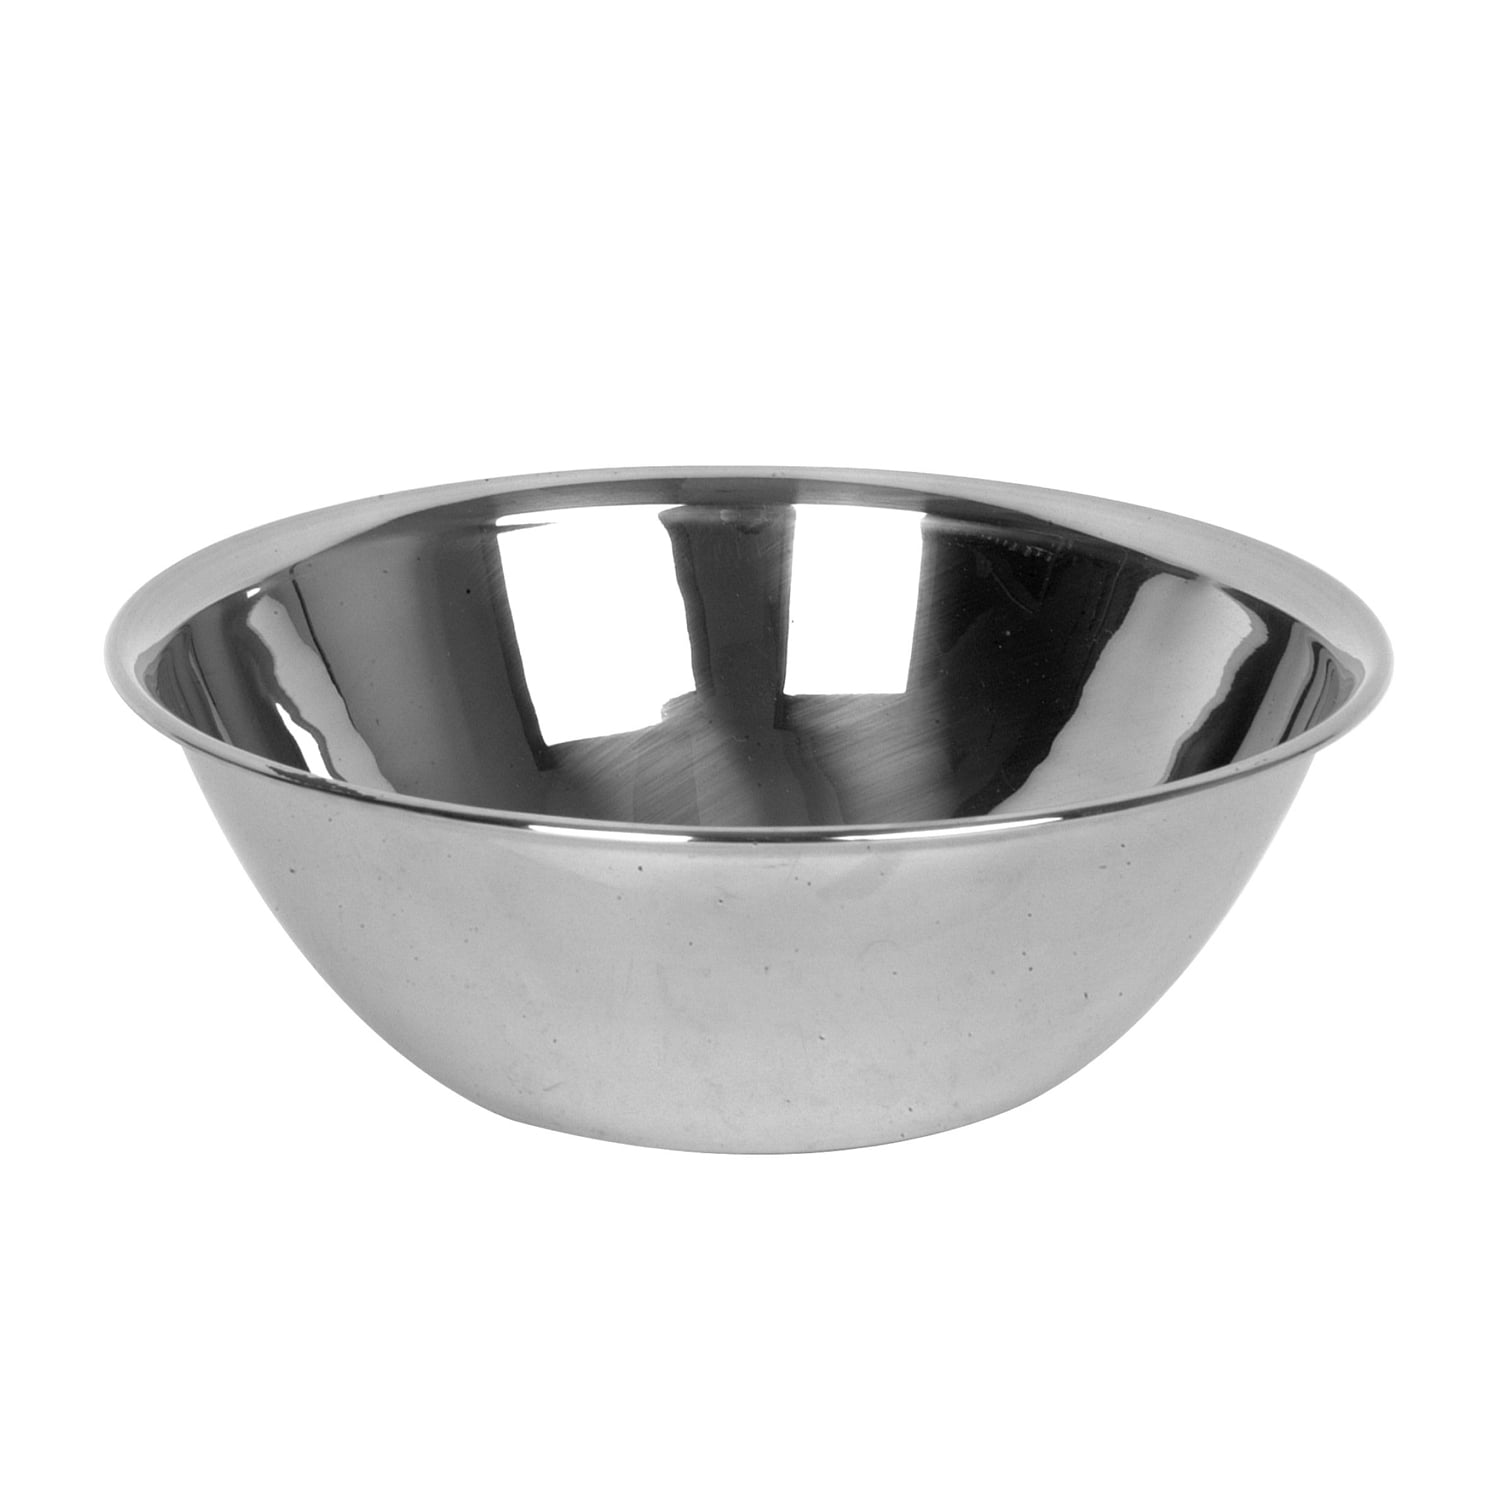 8 Qt. Economy Stainless Steel Mixing Bowl in Mixing Bowls from